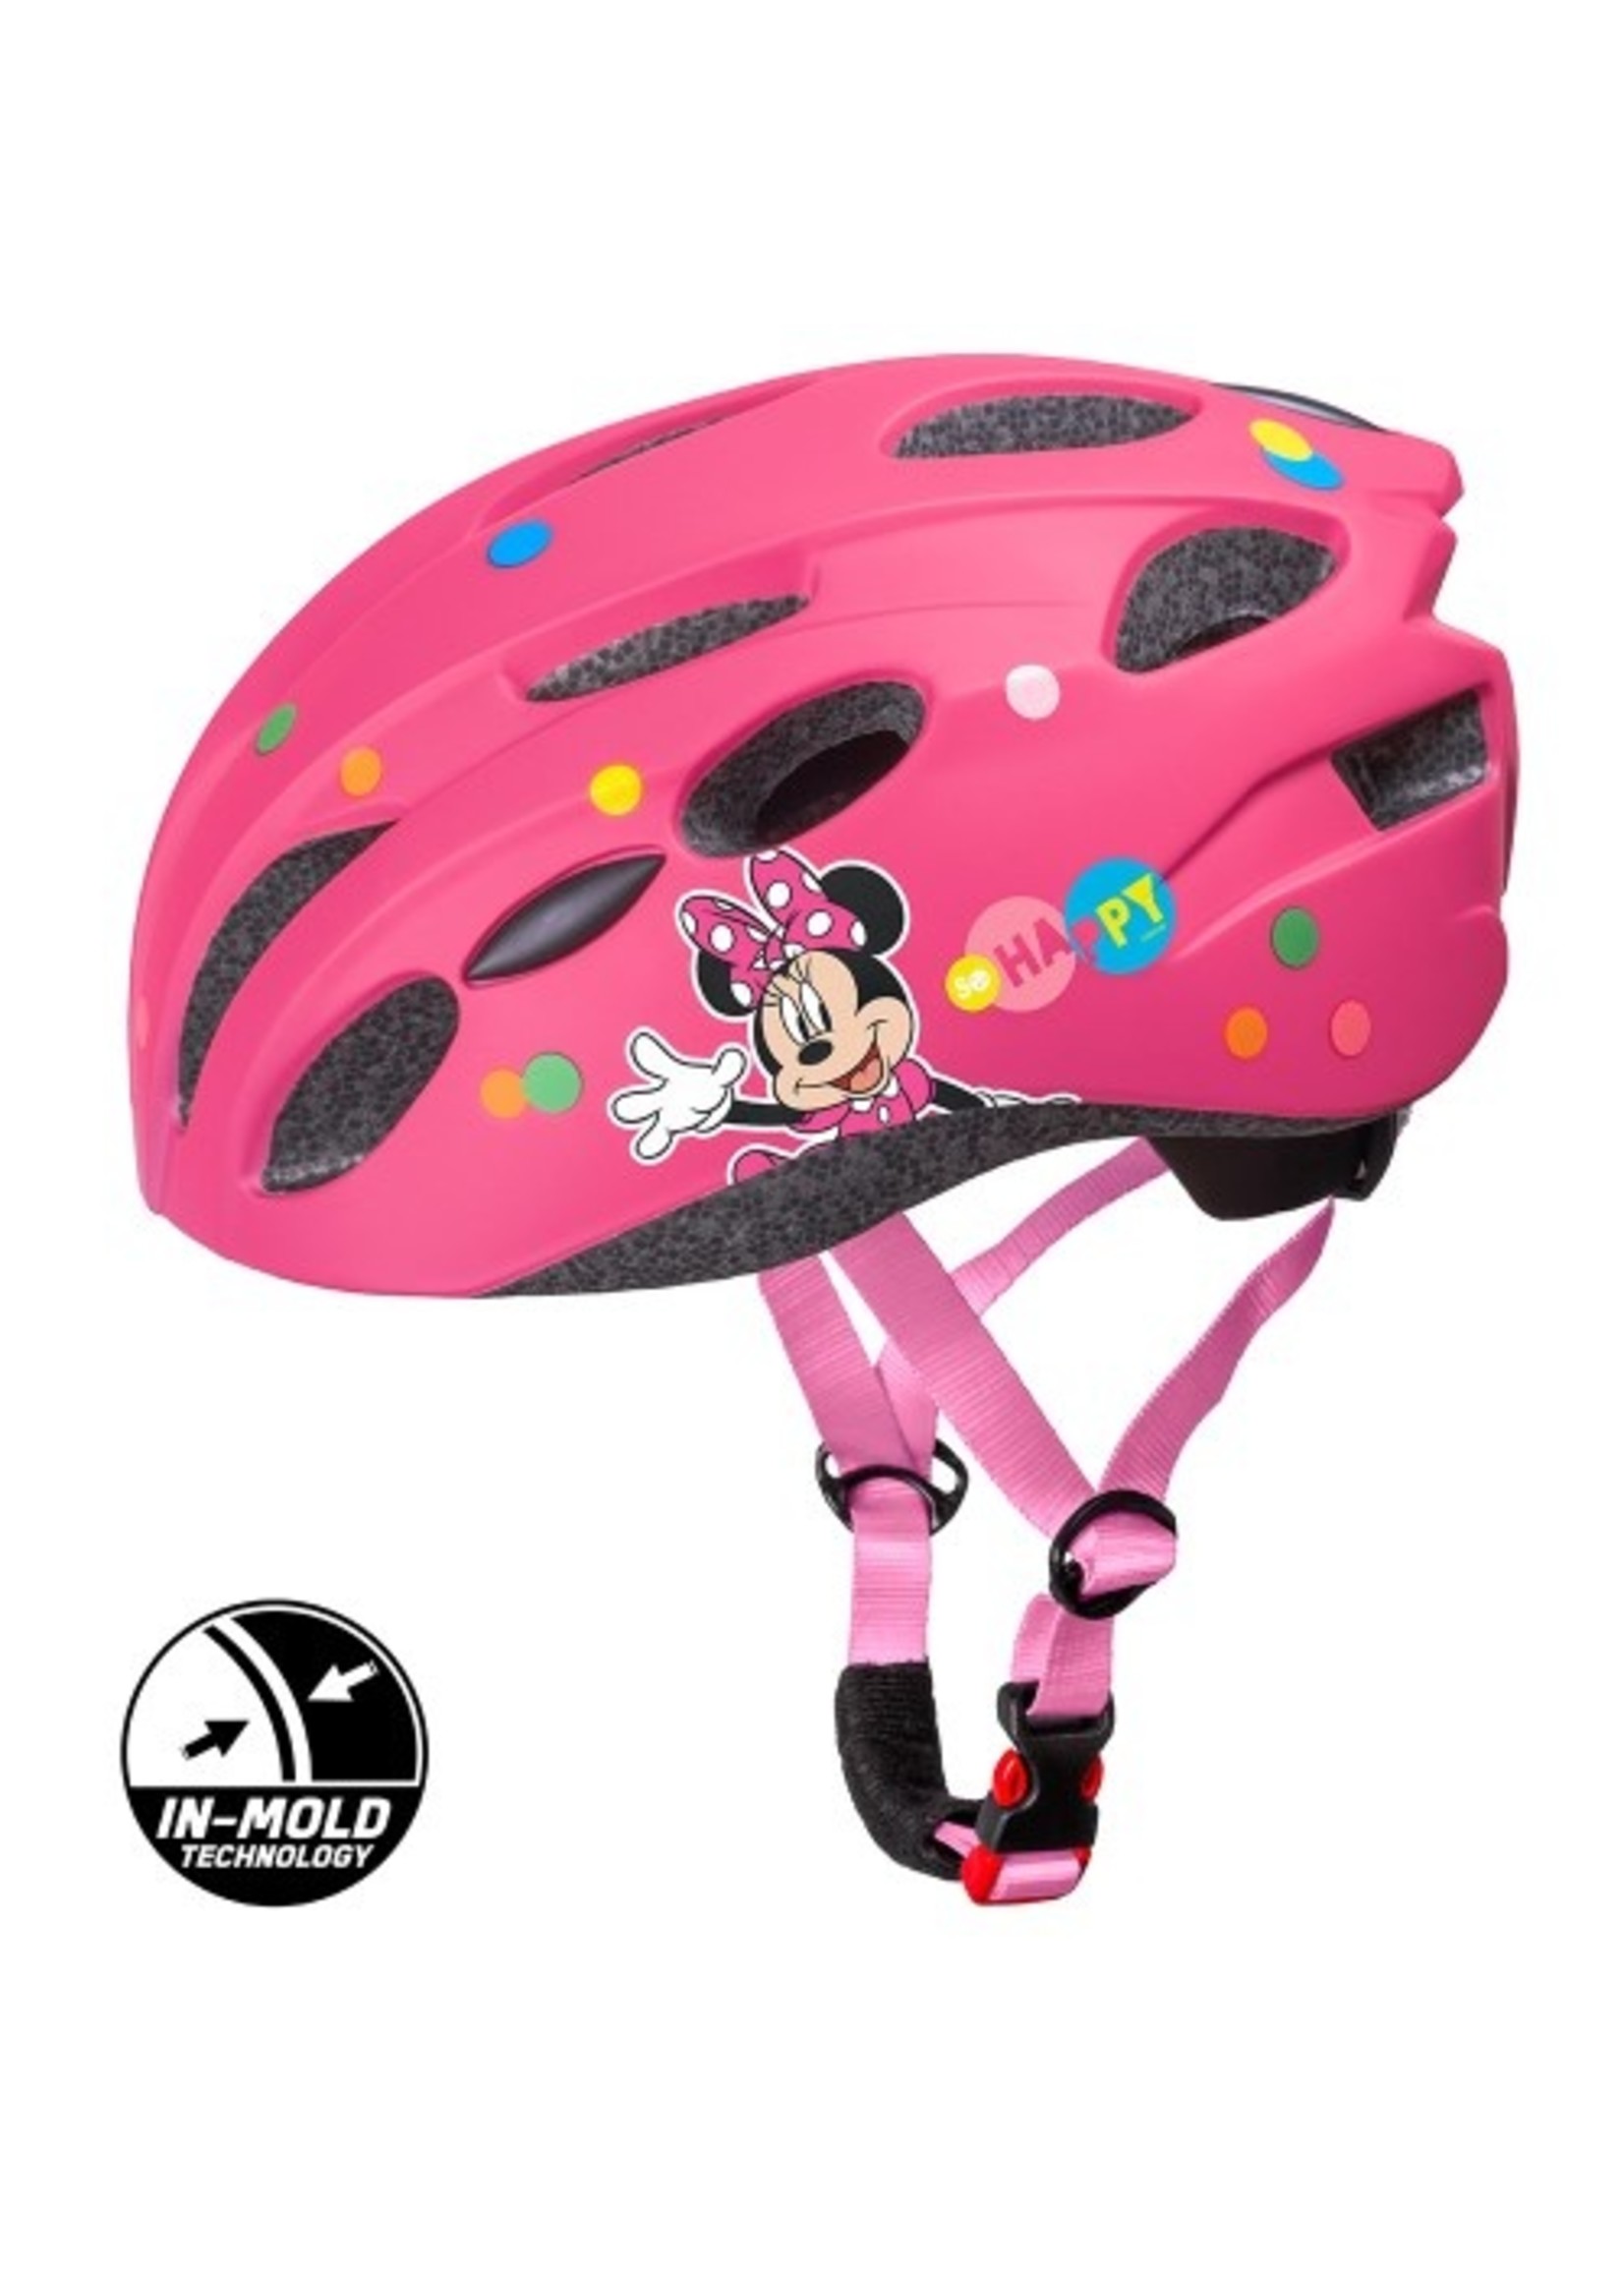 Minnie Mouse bicycle helmet from Disney pink 